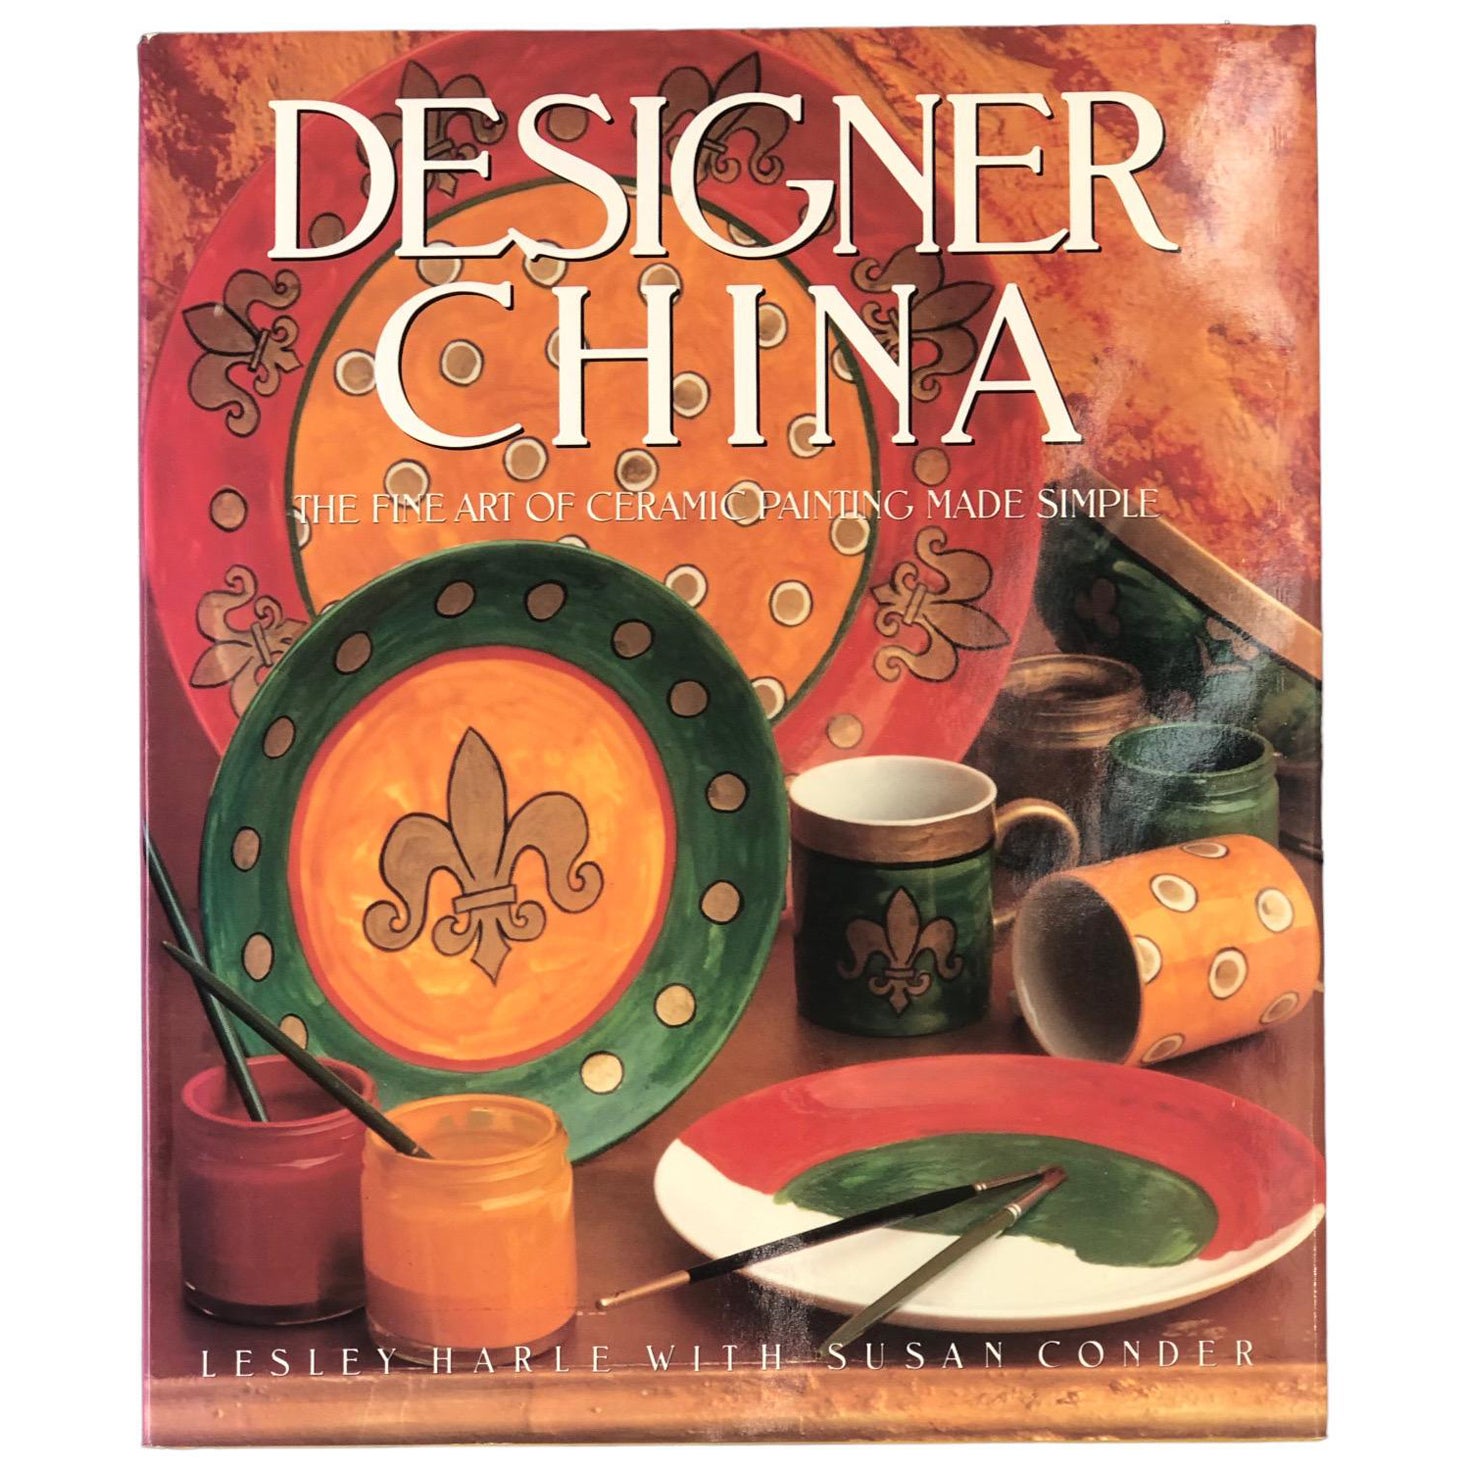 Designer China - the Fine Art of Ceramic Painting Made Simple For Sale